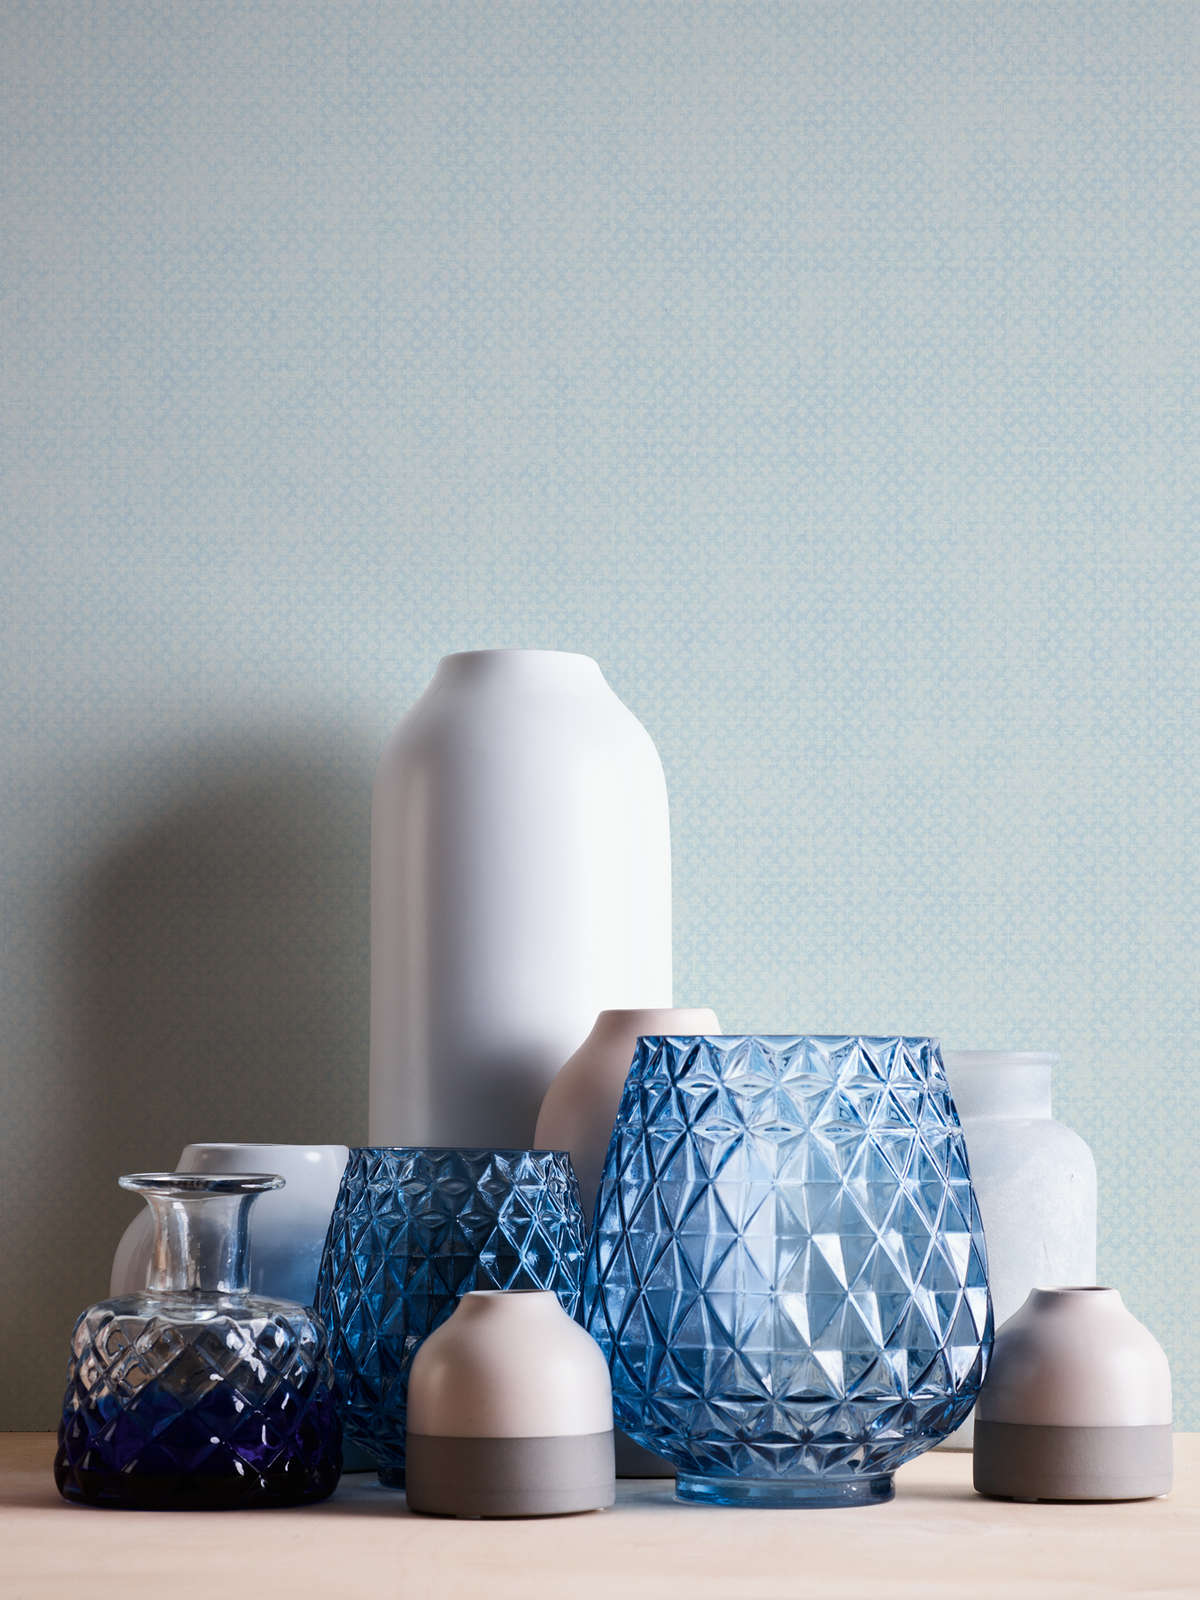             Non-woven wallpaper with fine textured pattern - blue, white
        